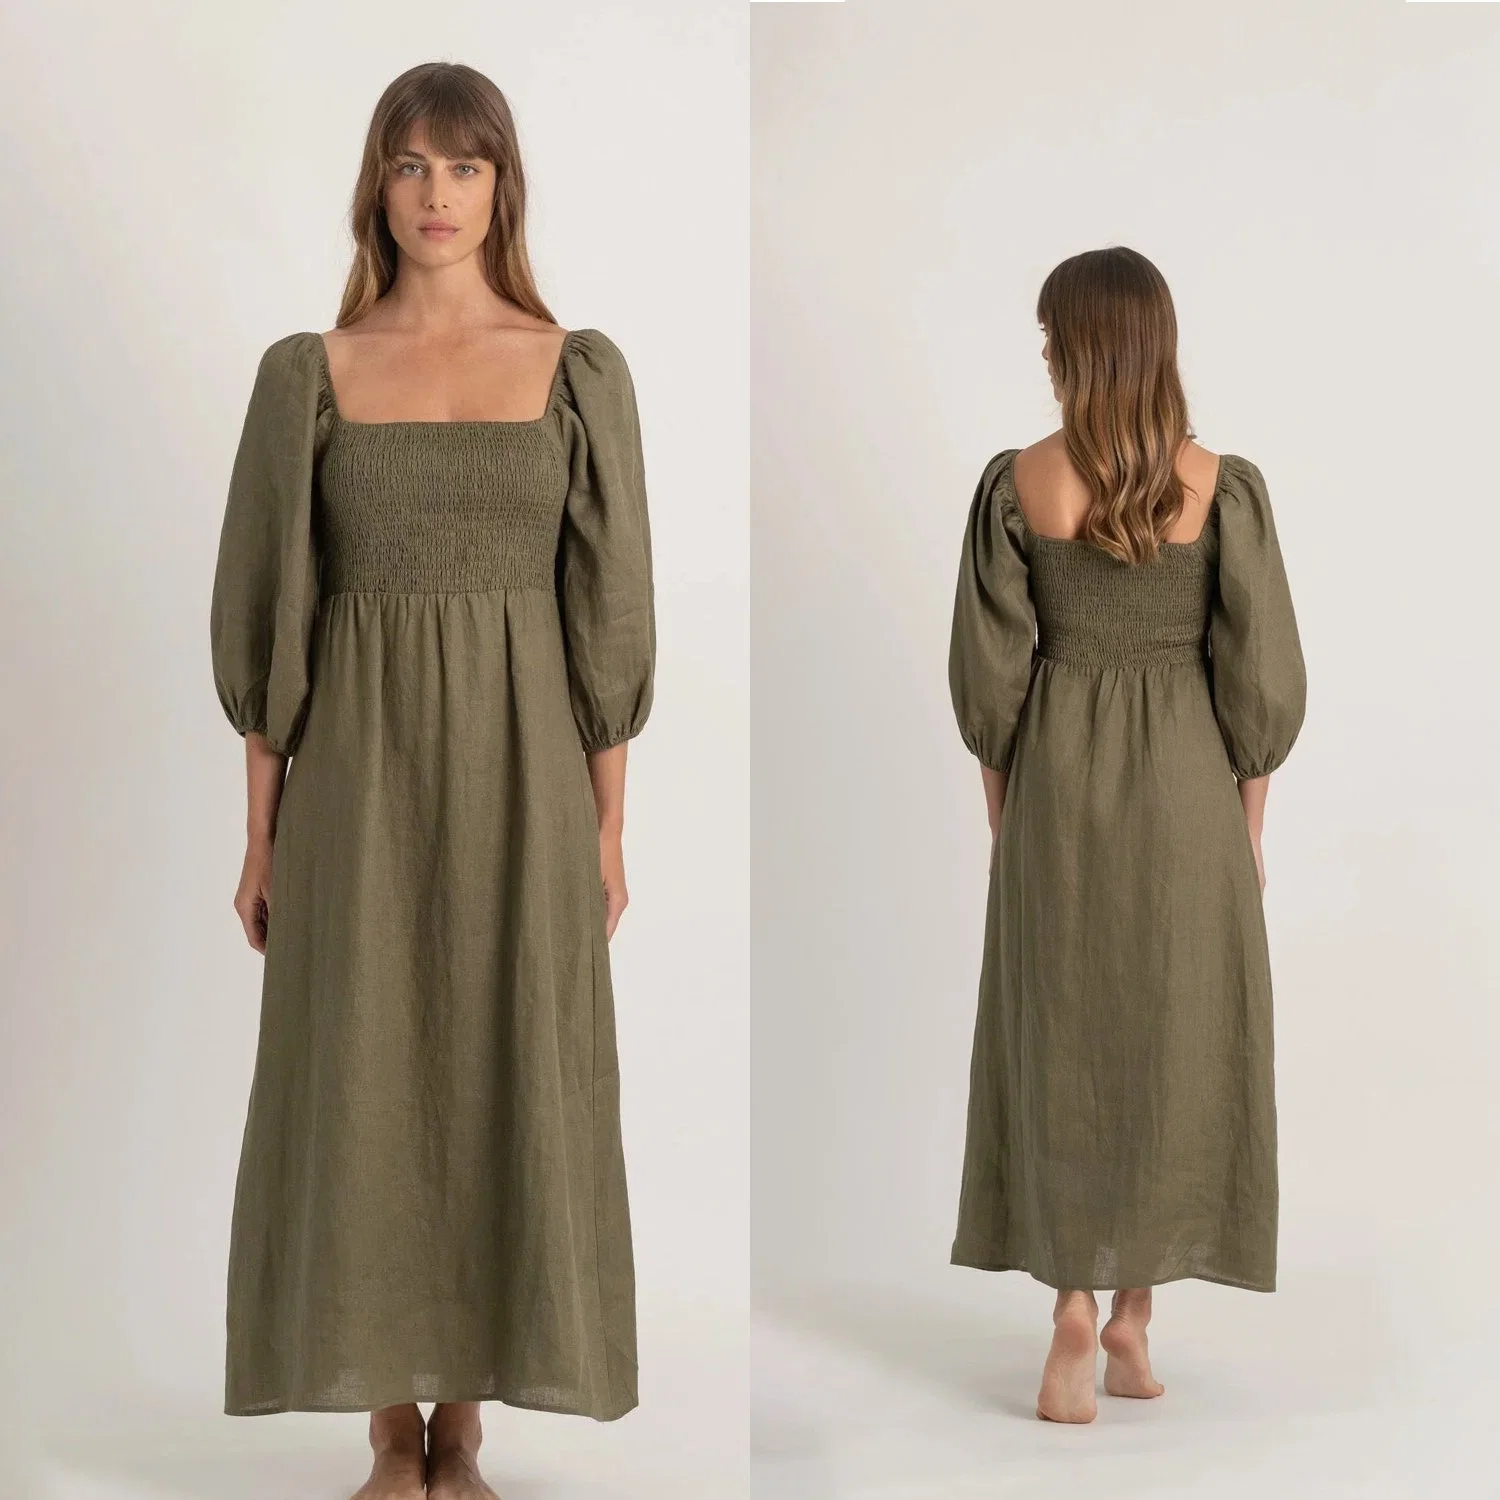 Women's Clothing Linen Casual Square Neck Bubble Sleeve Flared Women's Long Dress